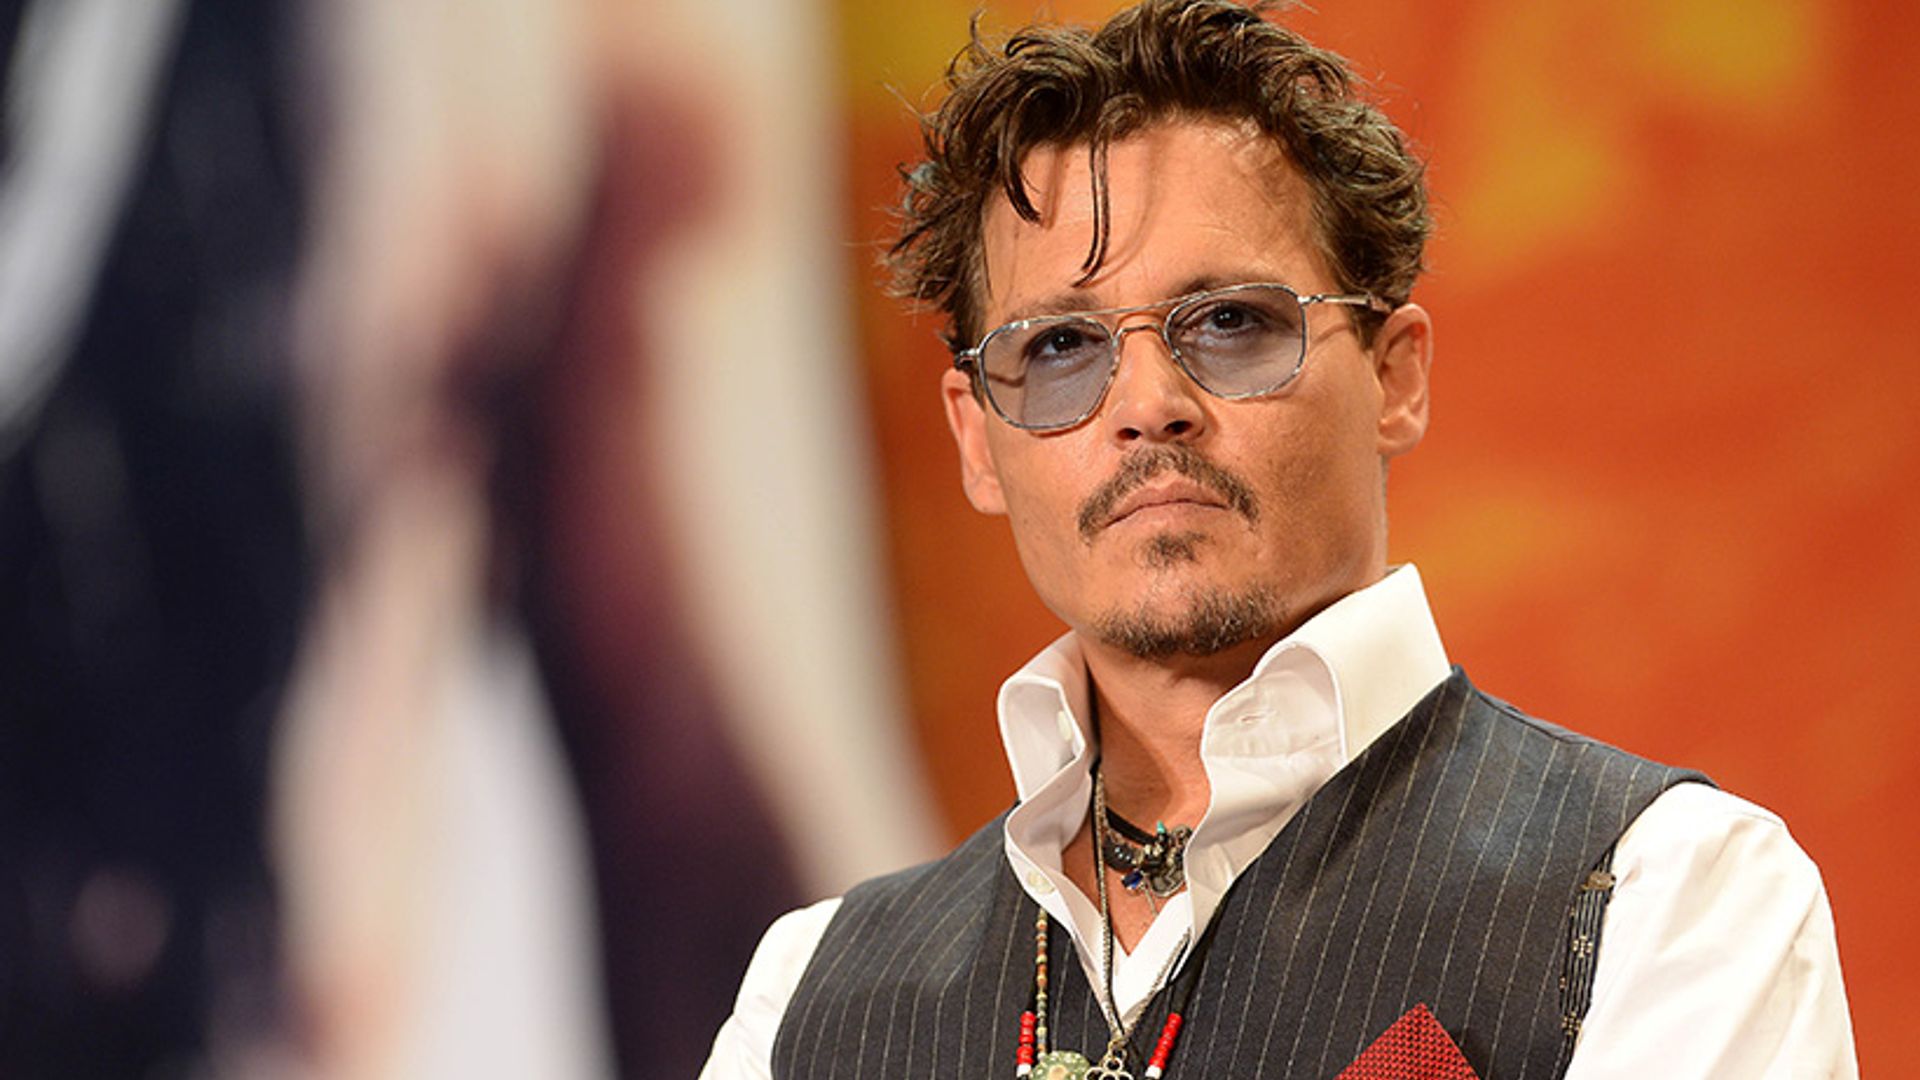 What is Johnny Depp's net worth?